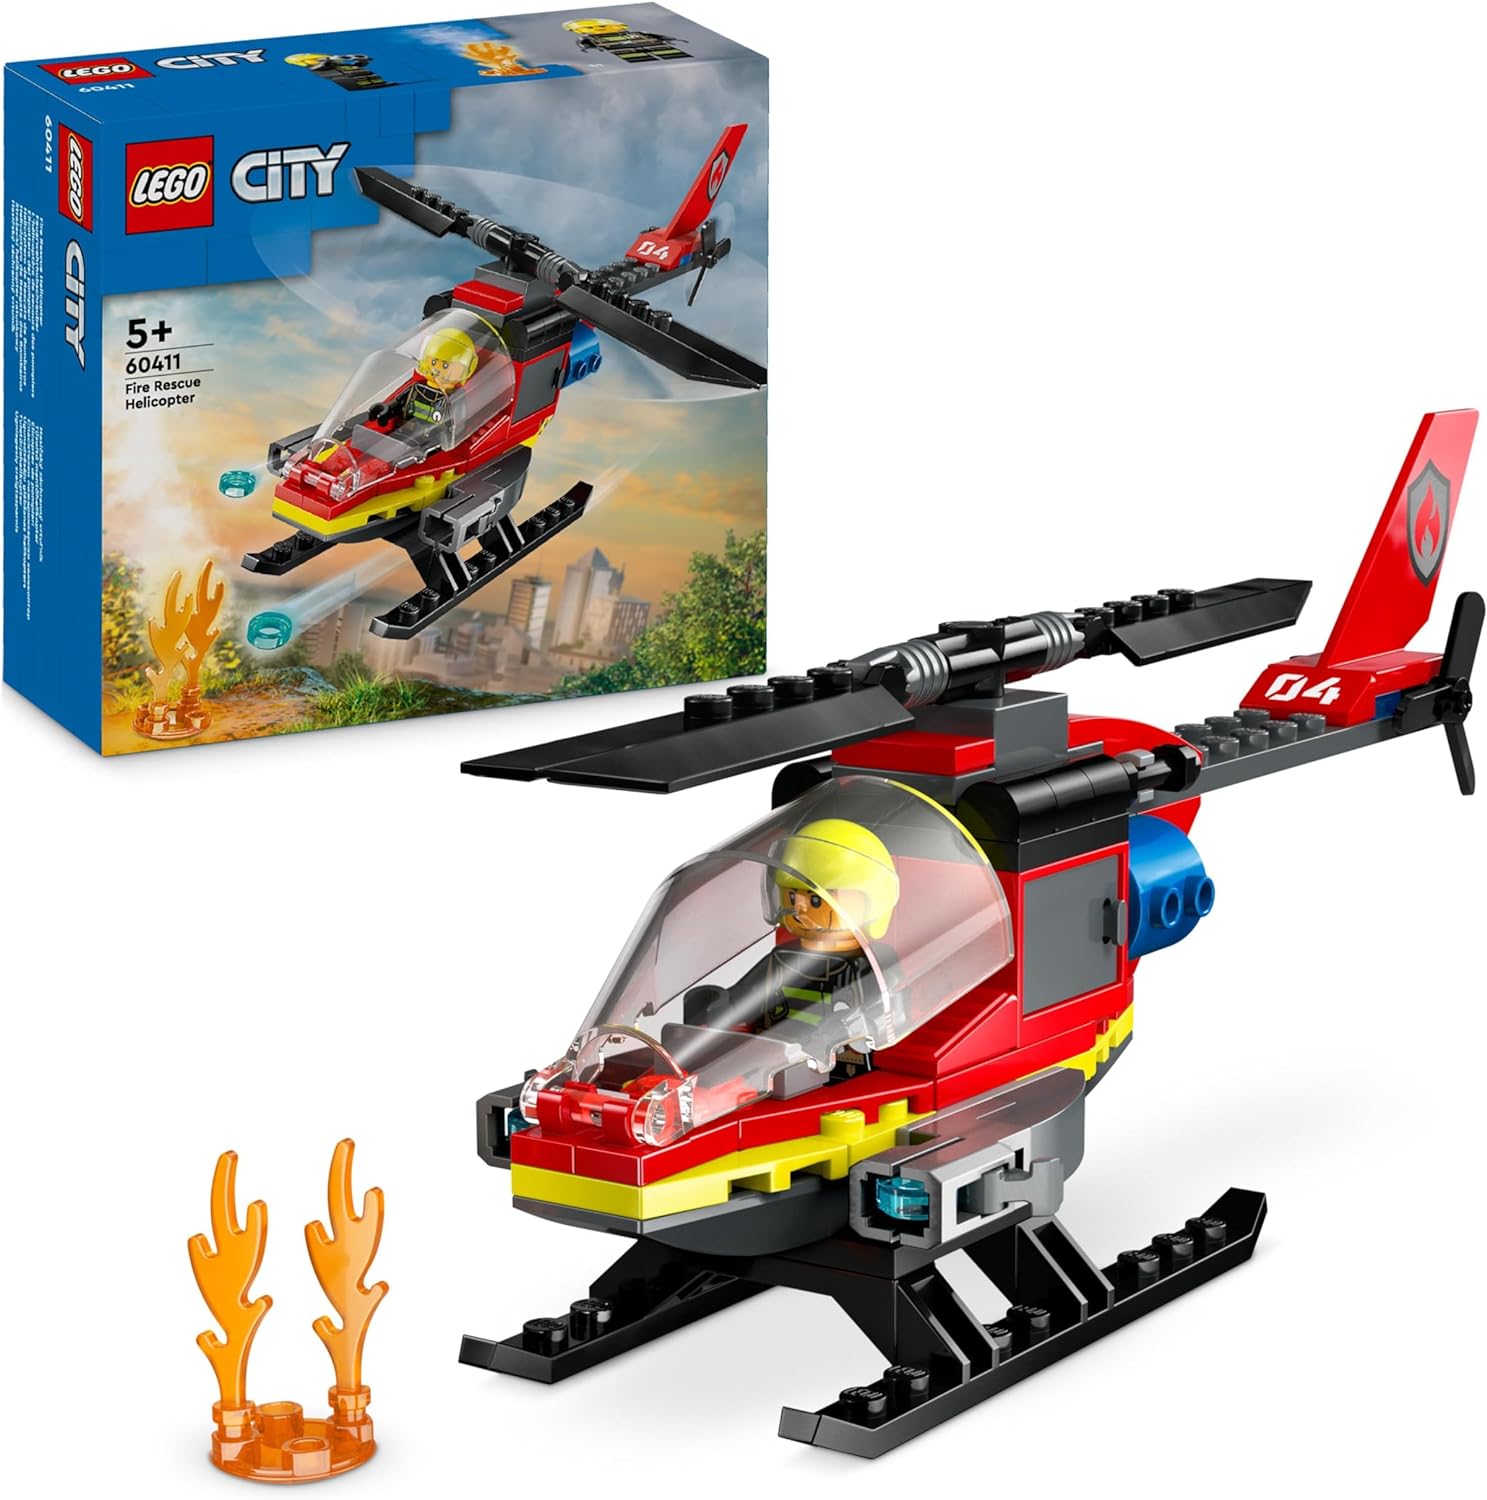 LEGO City 60411 Fire Brigade Helicopter Set with Helicopter Toy and Pilot Figure, Fire Brigade Helicopter for an Imaginative Playing Experience, Gift for Children, Boys and Girls from 5 Years